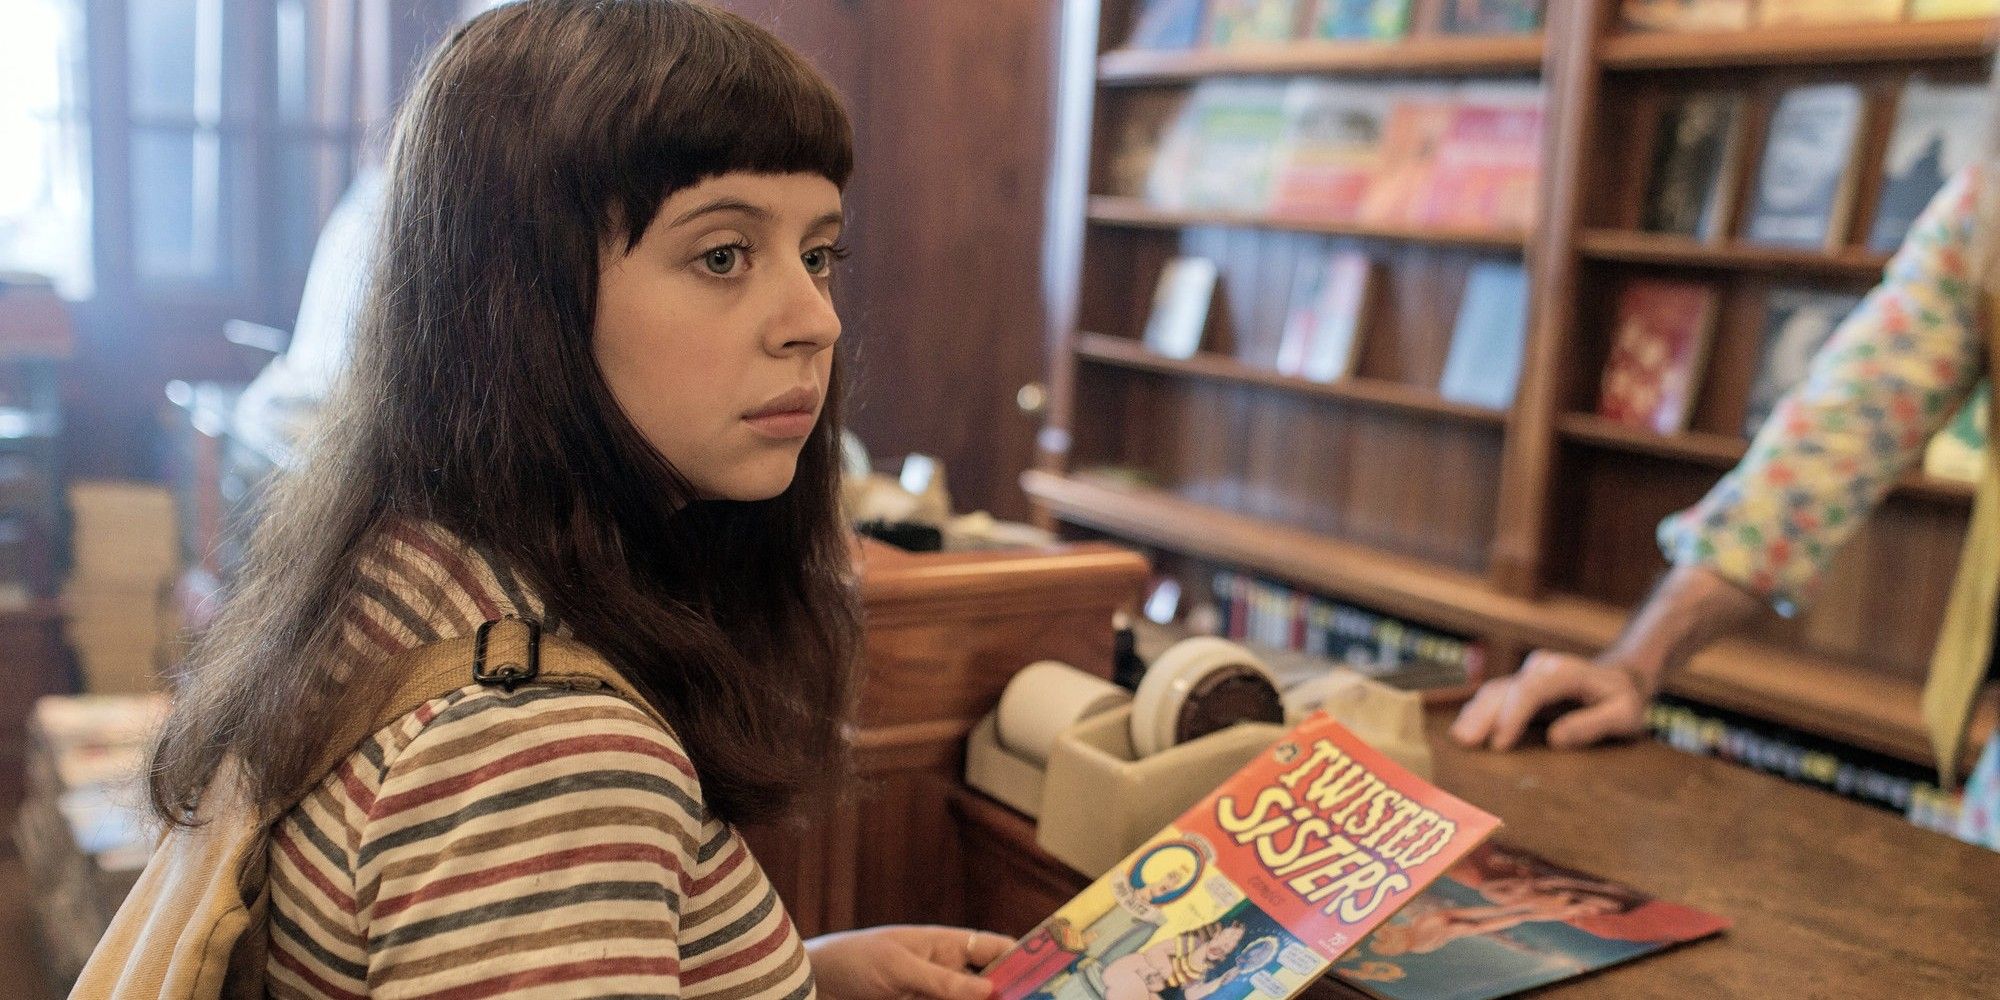 Bel Powley in 'The Diary of a Teenage Girl'